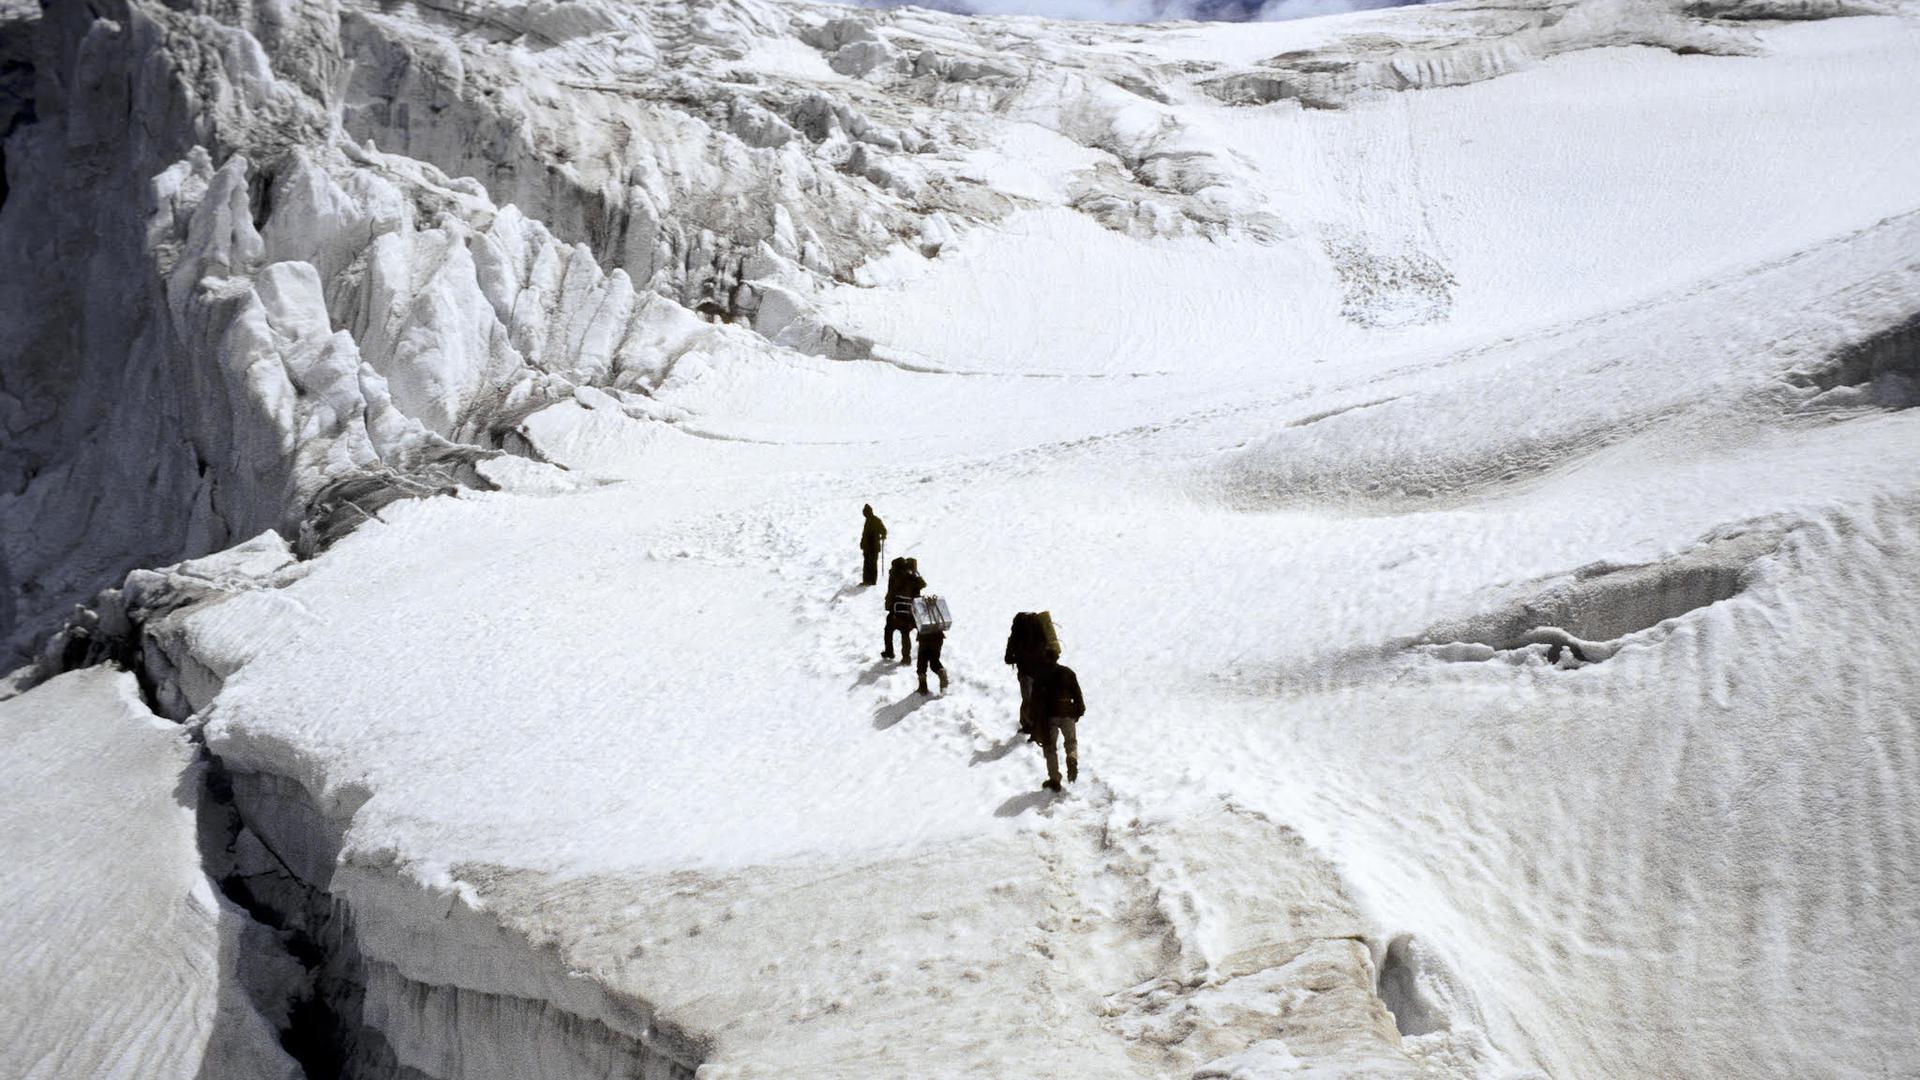 A research team crossing an ice plateau in the Indian Himalayas faced risks of hidden crevasses, storms, avalanches and earthquakes.